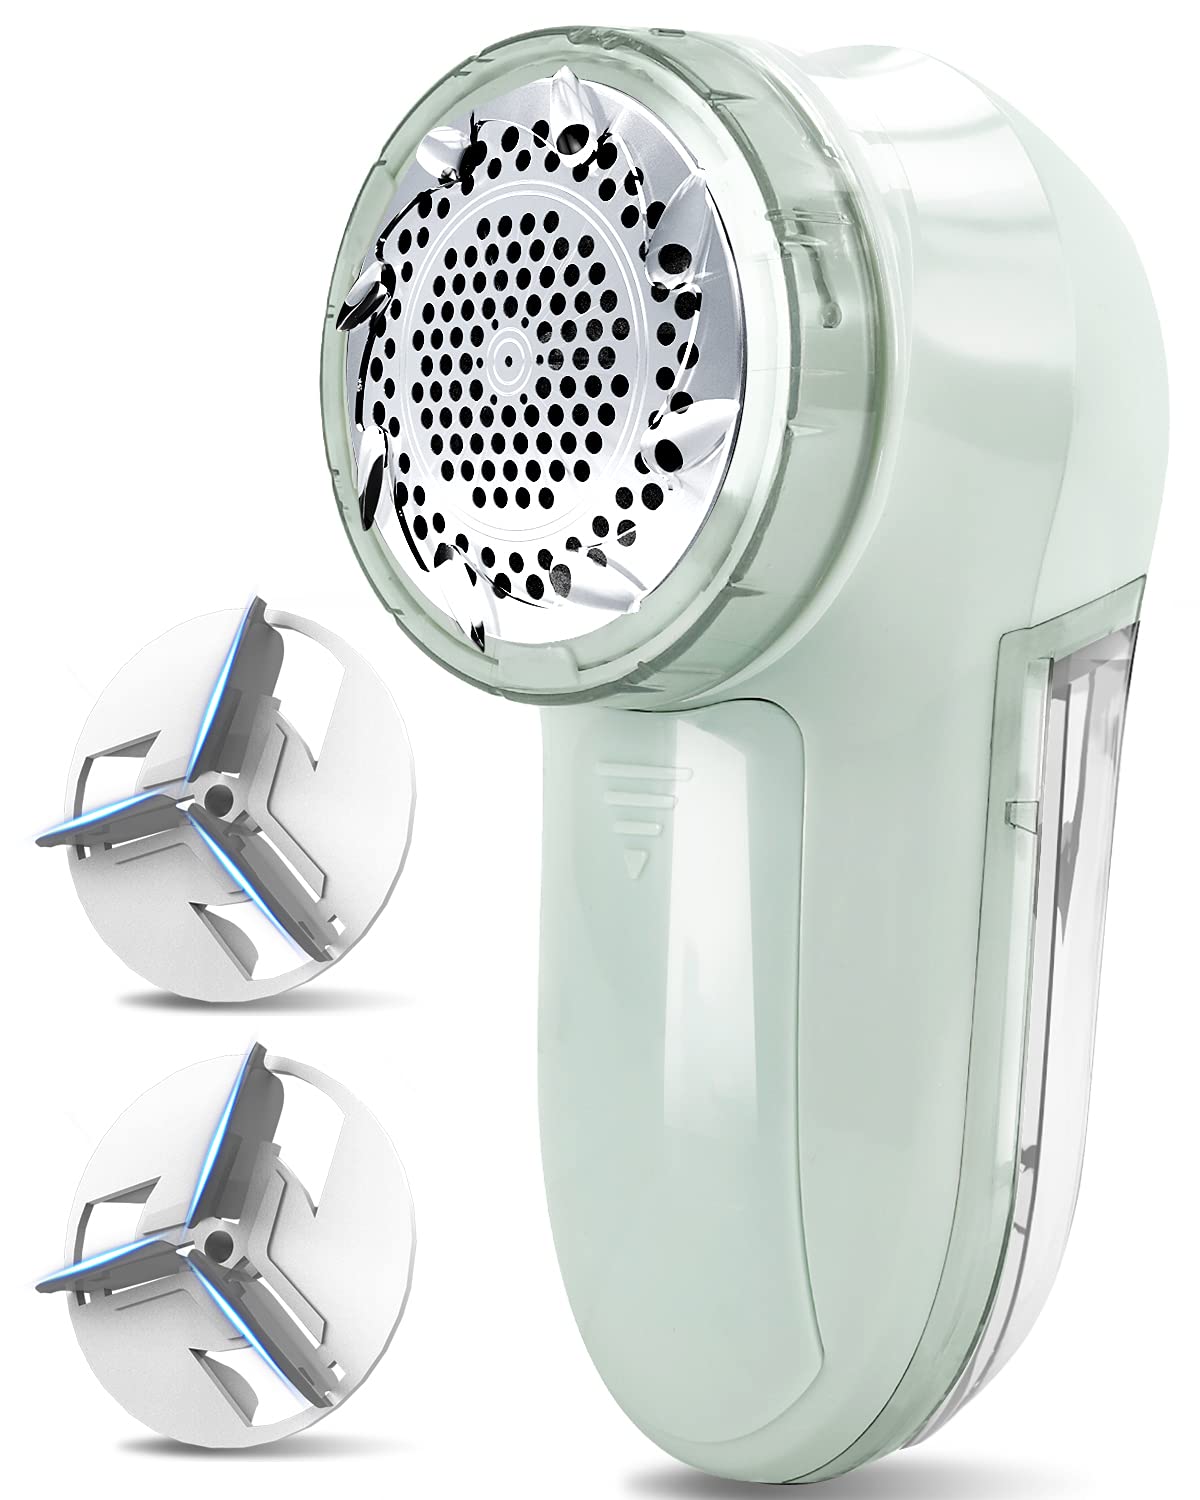 This fabric shaver by Steamery removes pilling and lint